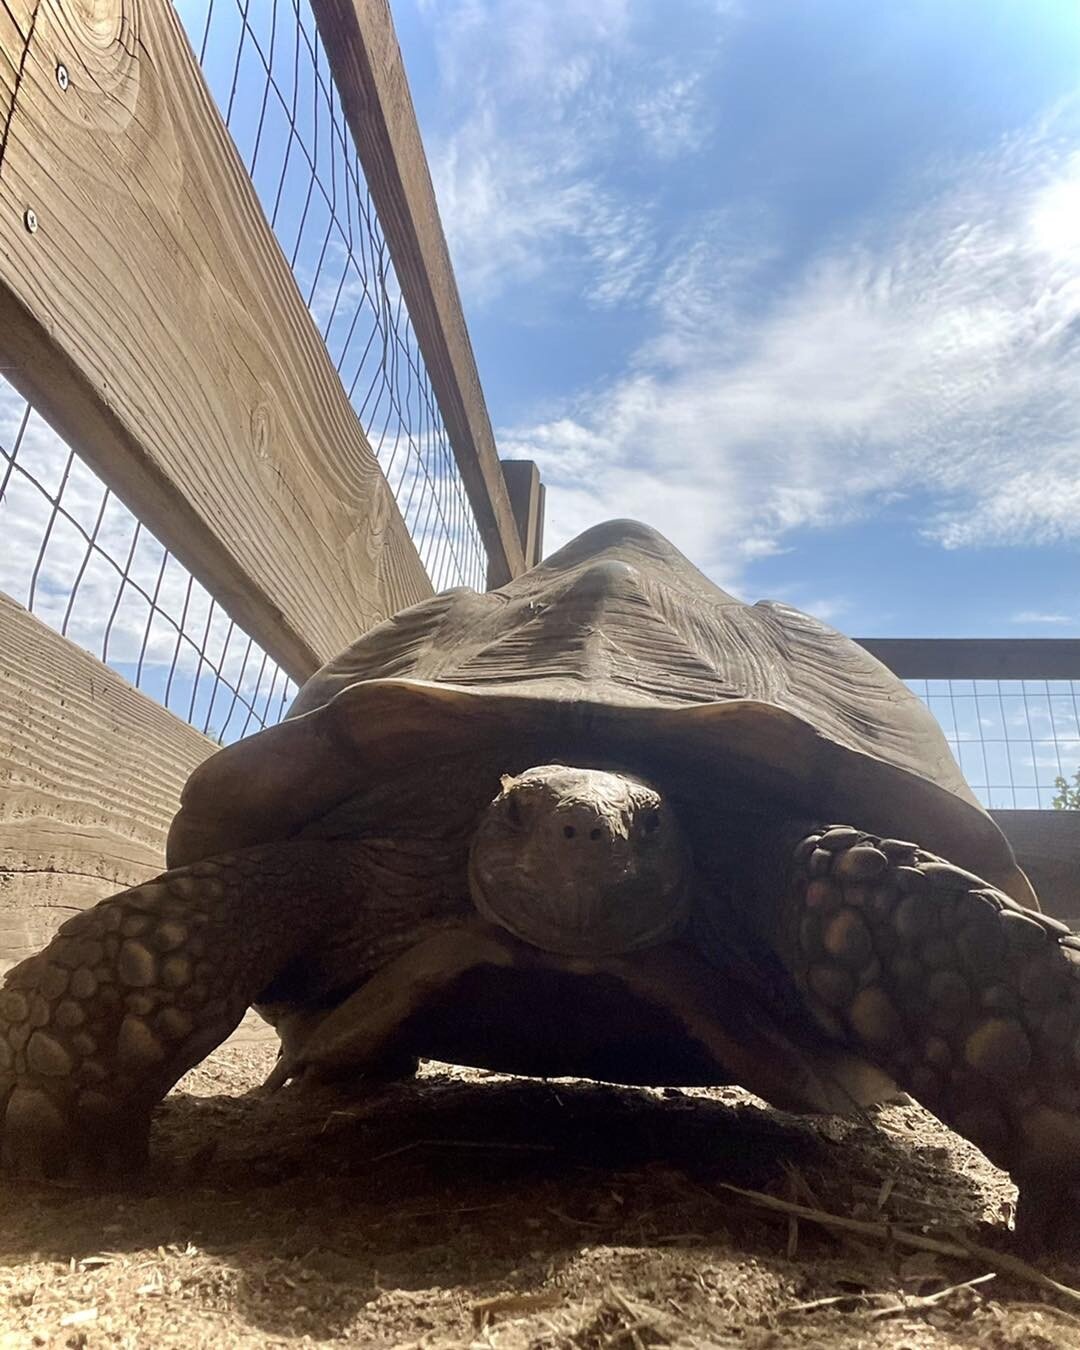 It&rsquo;s never a dull moment on the ranch yet sometime we get so busy with the day to day we forget to share some of our fun. Today Bluebell (one of our best producing South African locality leopard tortoises was supervising my excavation of her ho